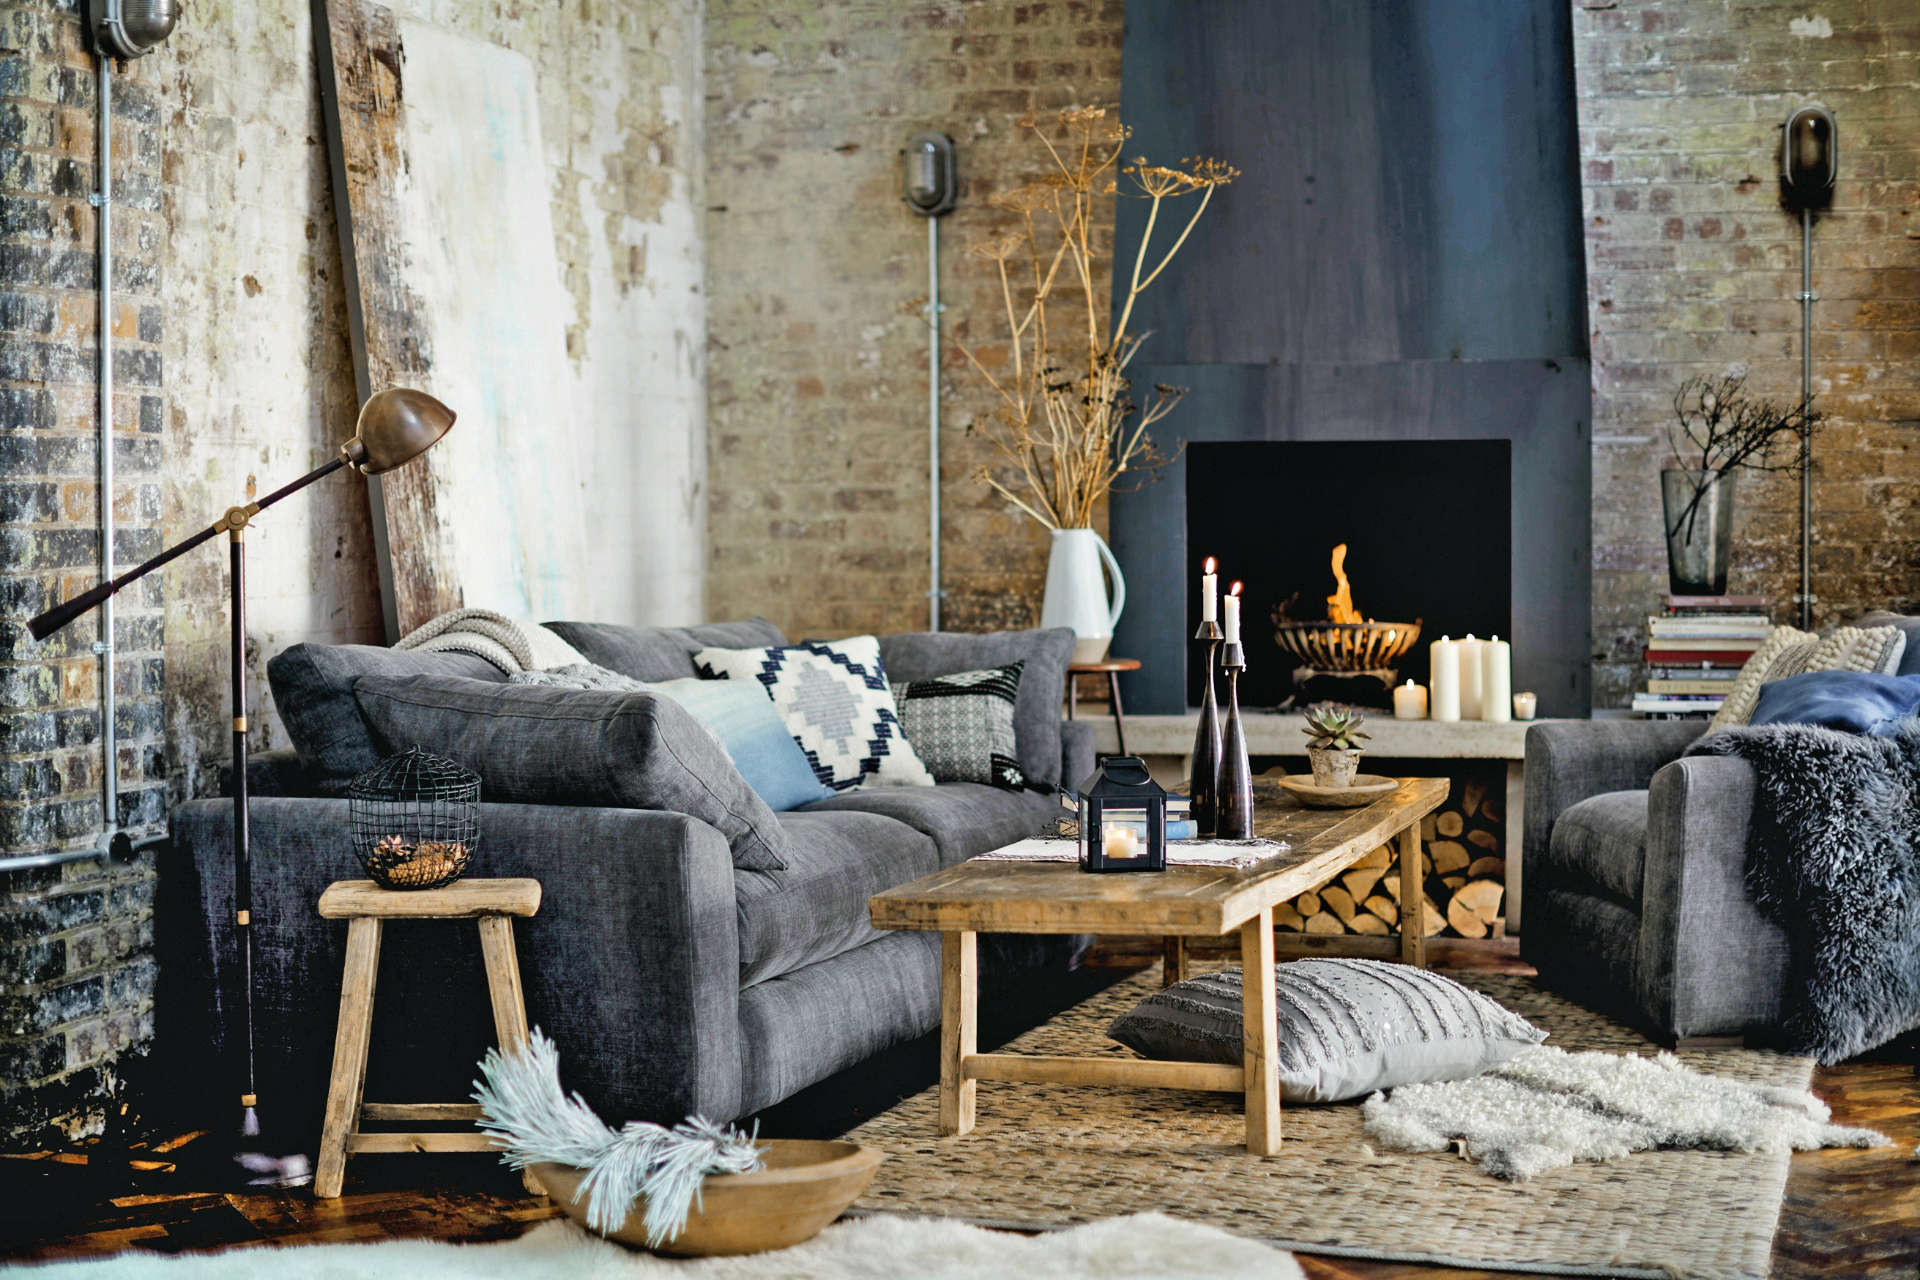 Hygge Home Ideas to Warm Your Personal Space